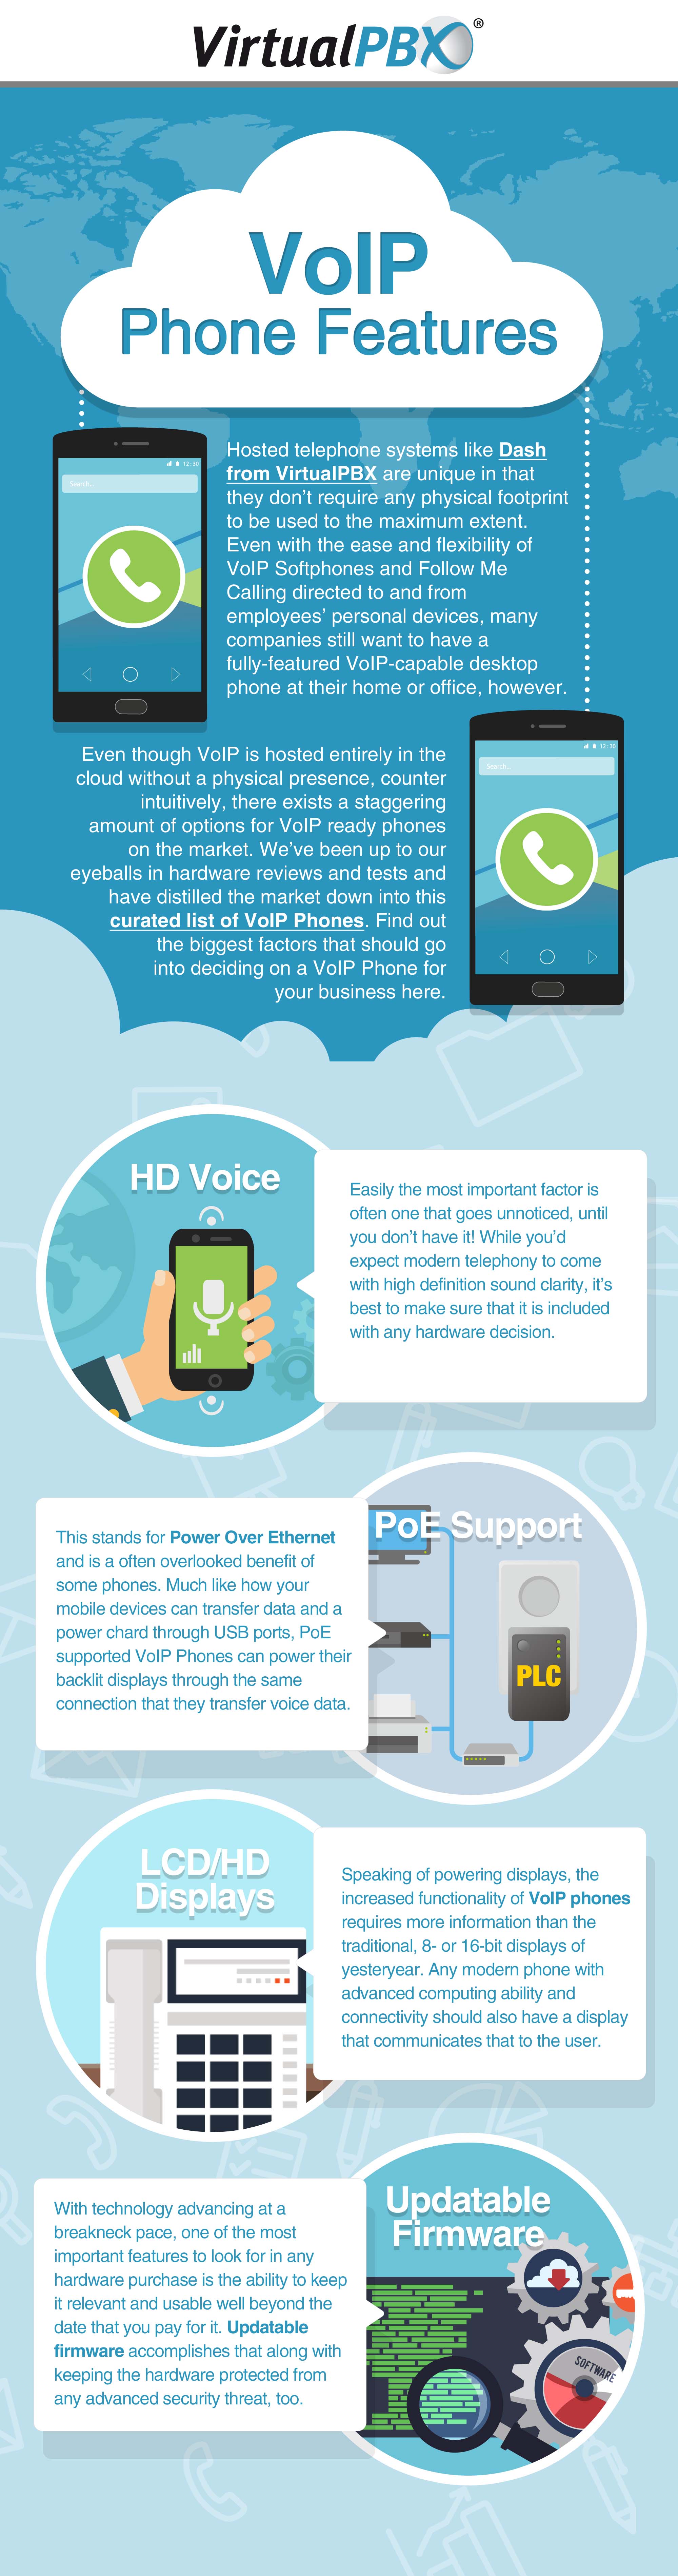 VoIP Phones and Devices